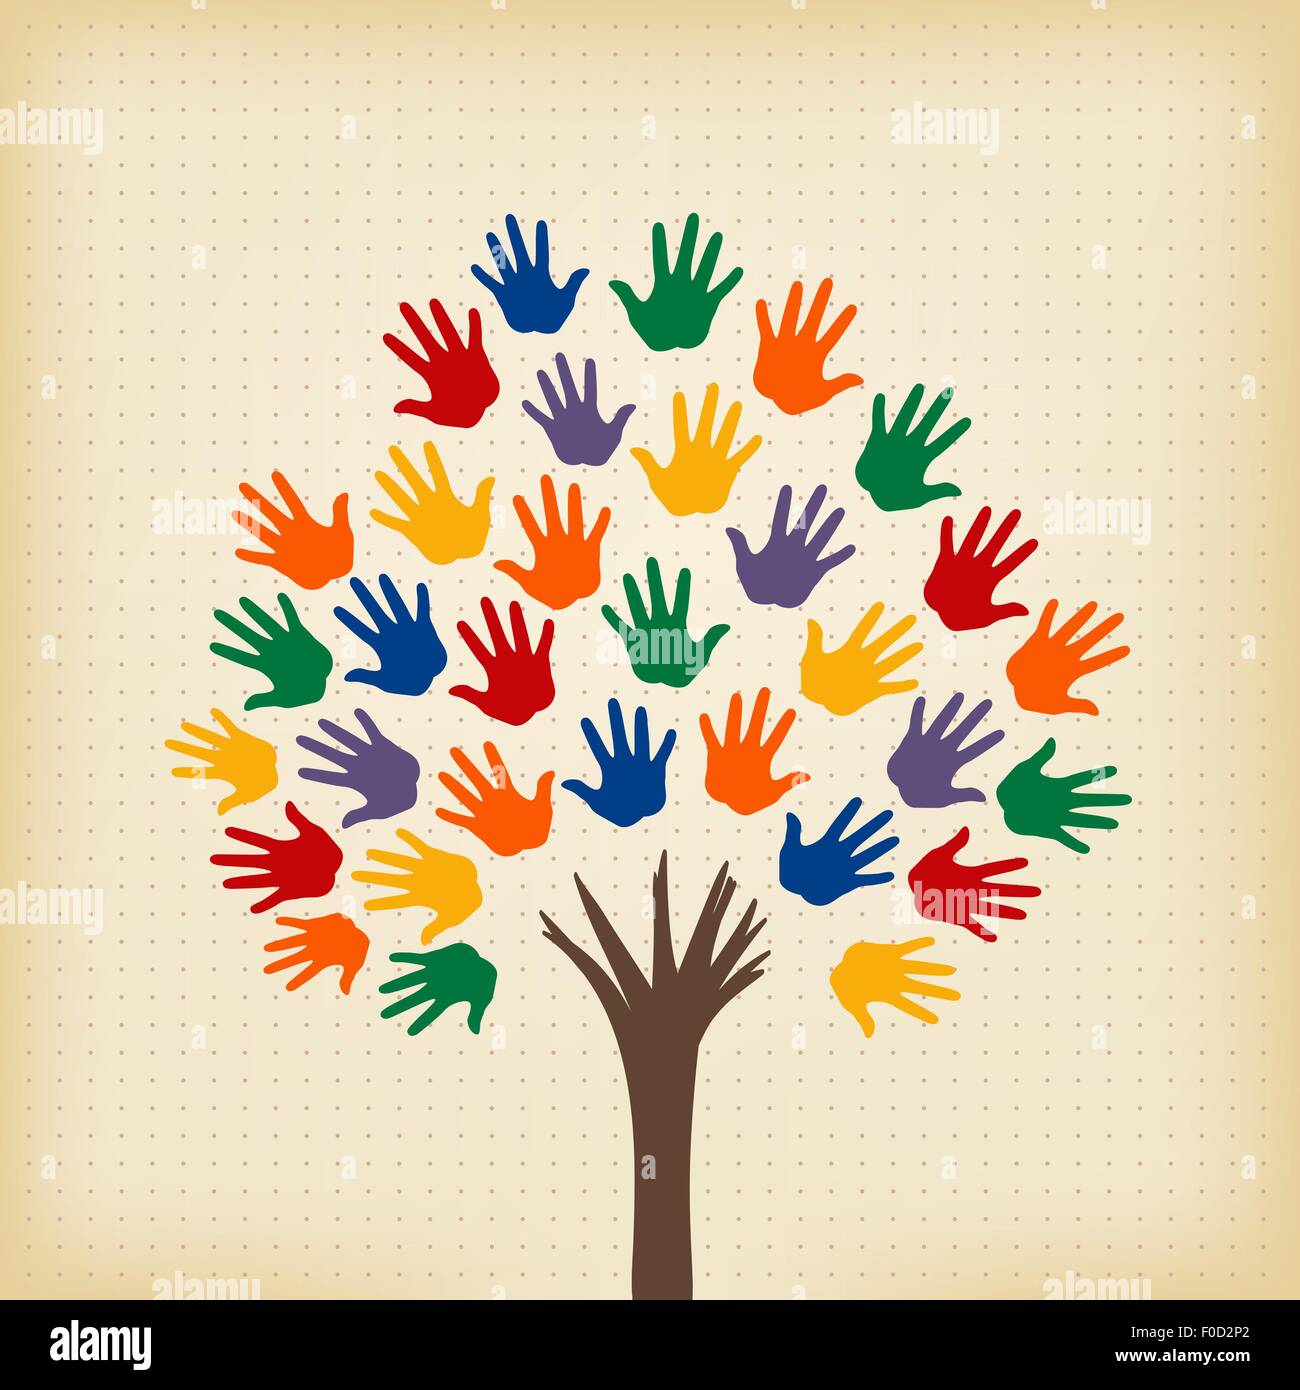 abstract tree with open hands as leaves Stock Vector